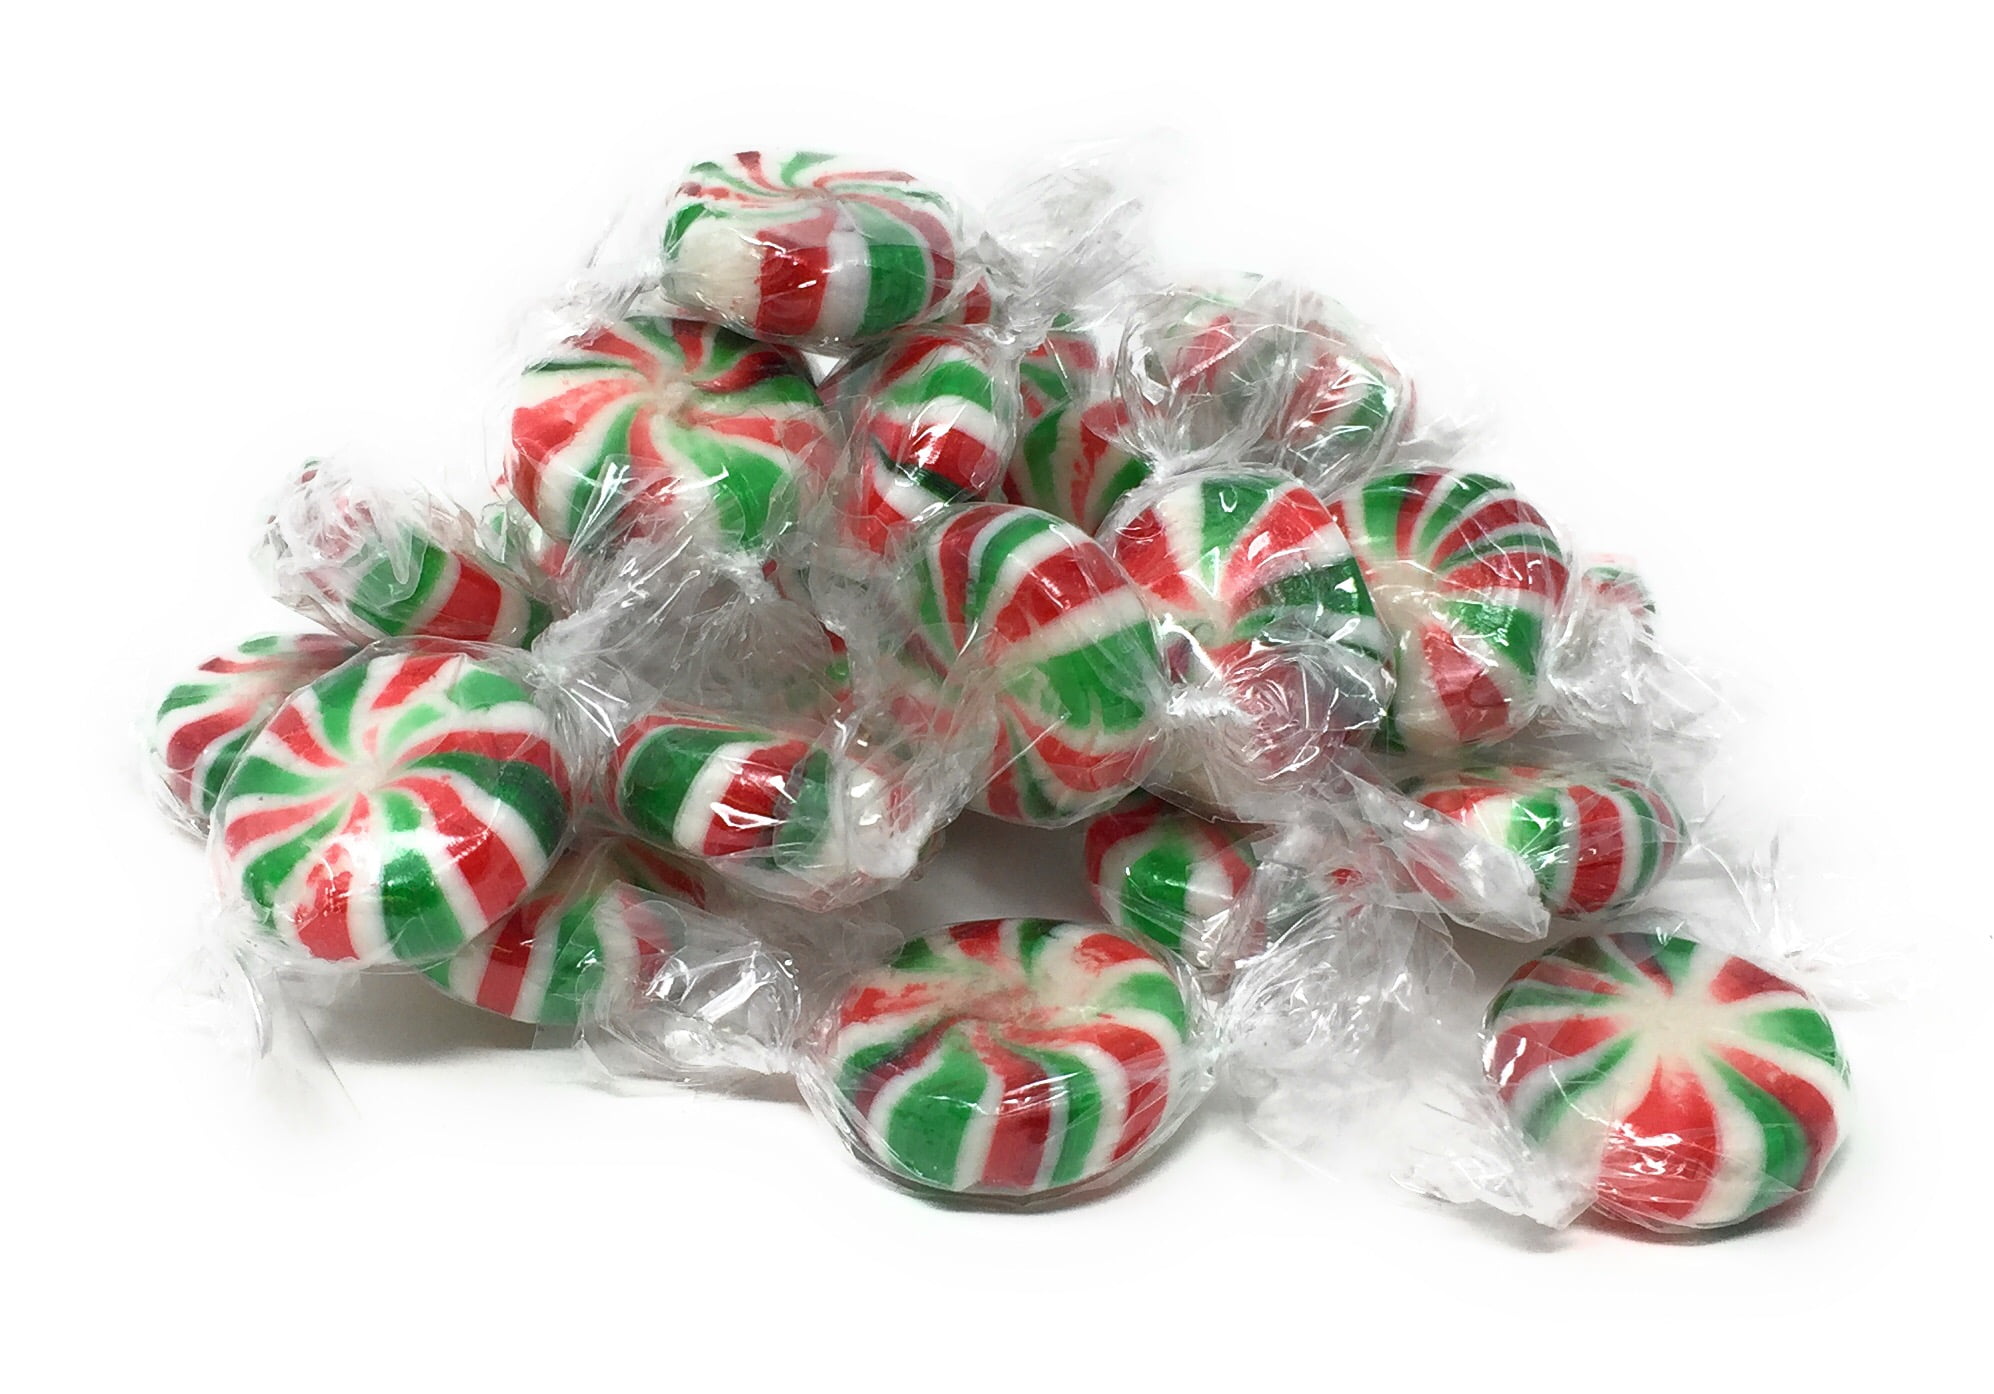 Red, White and Blue Candy Starlight Mints – Half Nuts